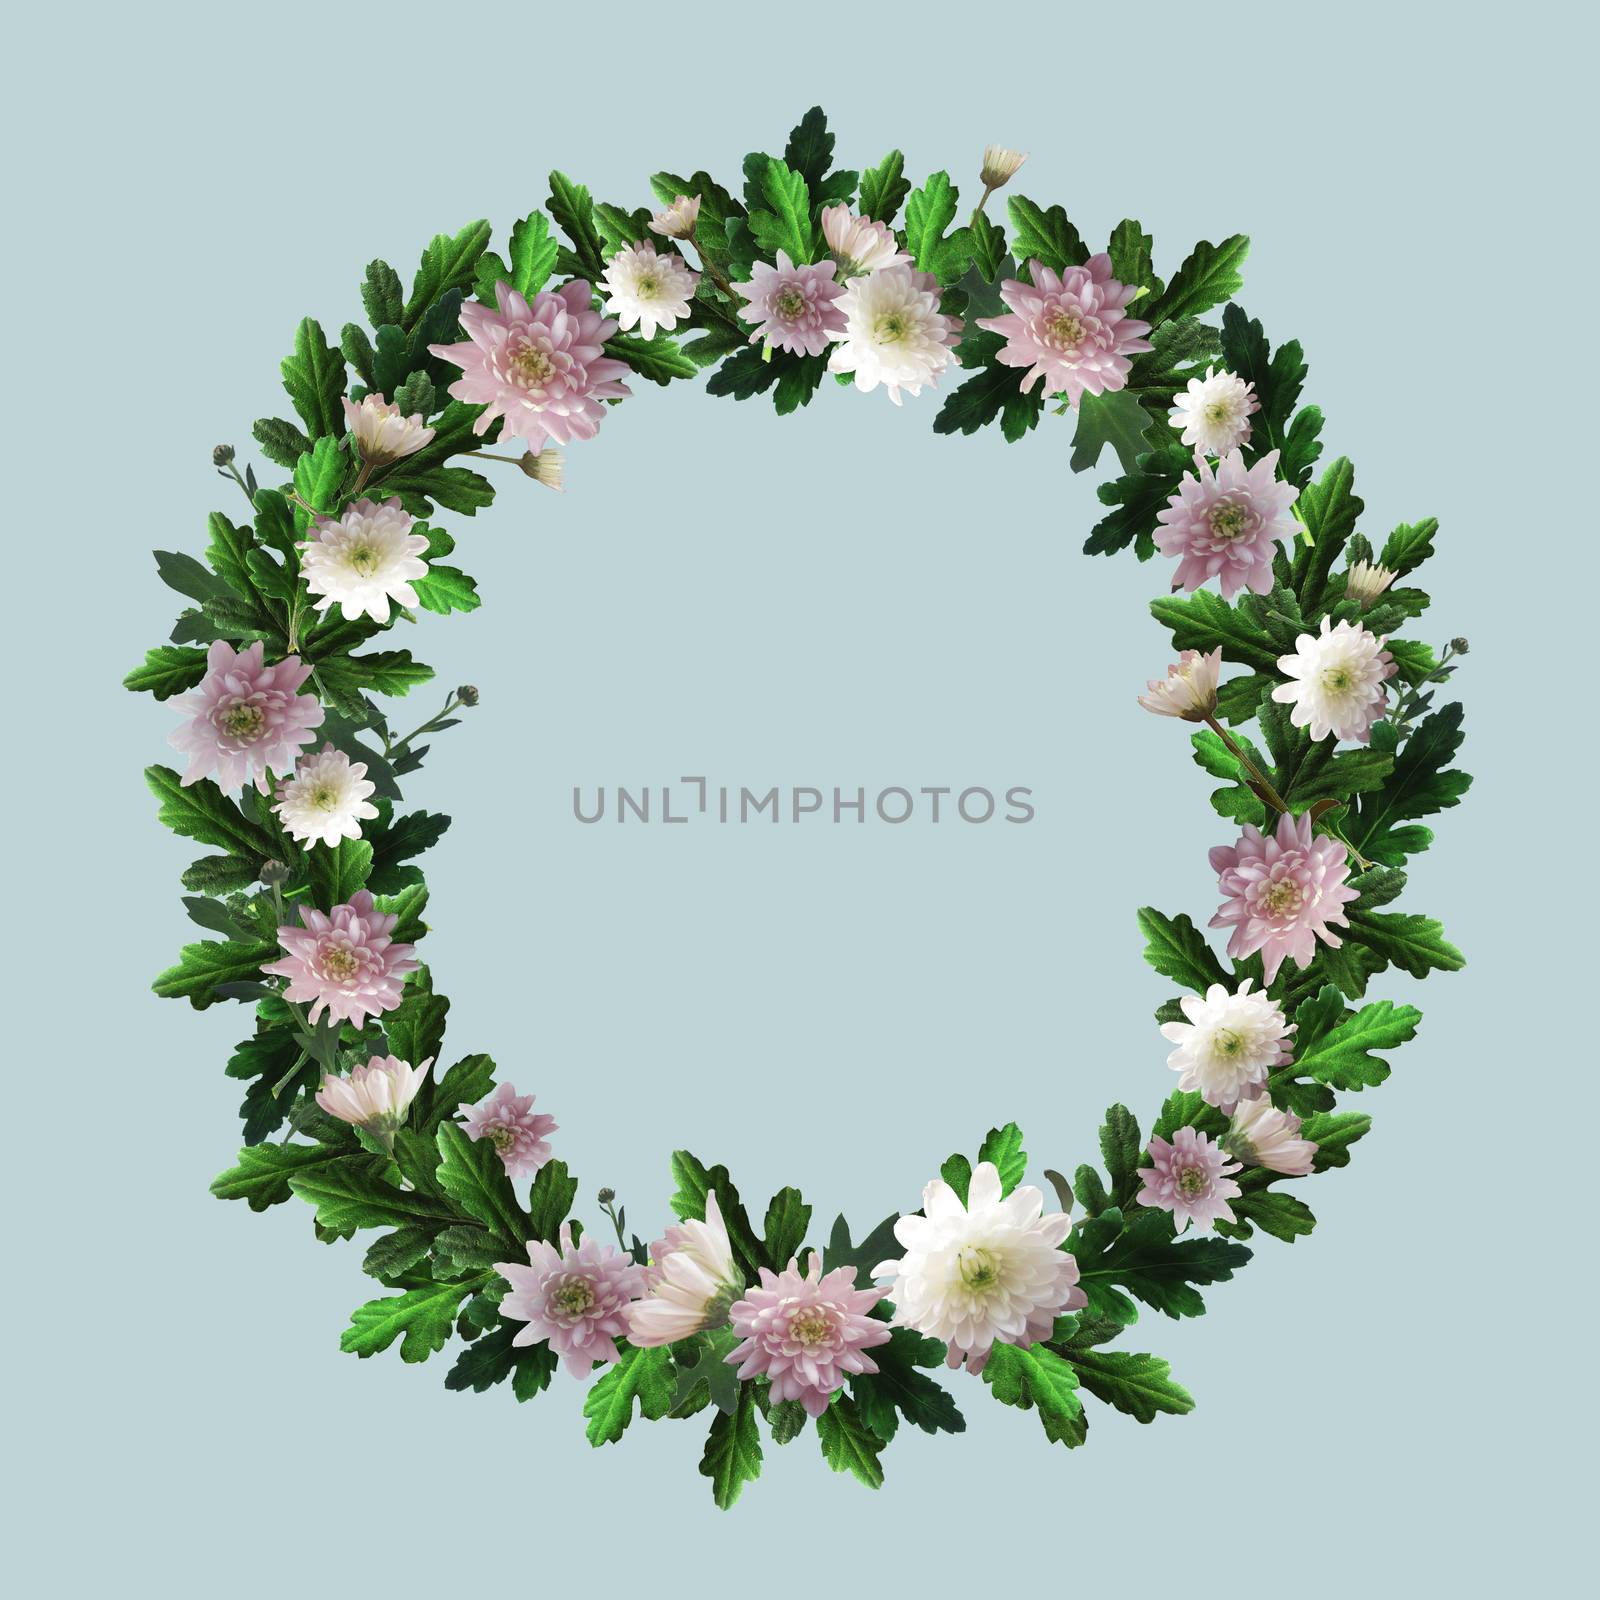 Wreath of flowers with space for text. Round frame with white and pink chrysanthemums, green leaves and twigs. Flowers and plants are arranged in a circle.